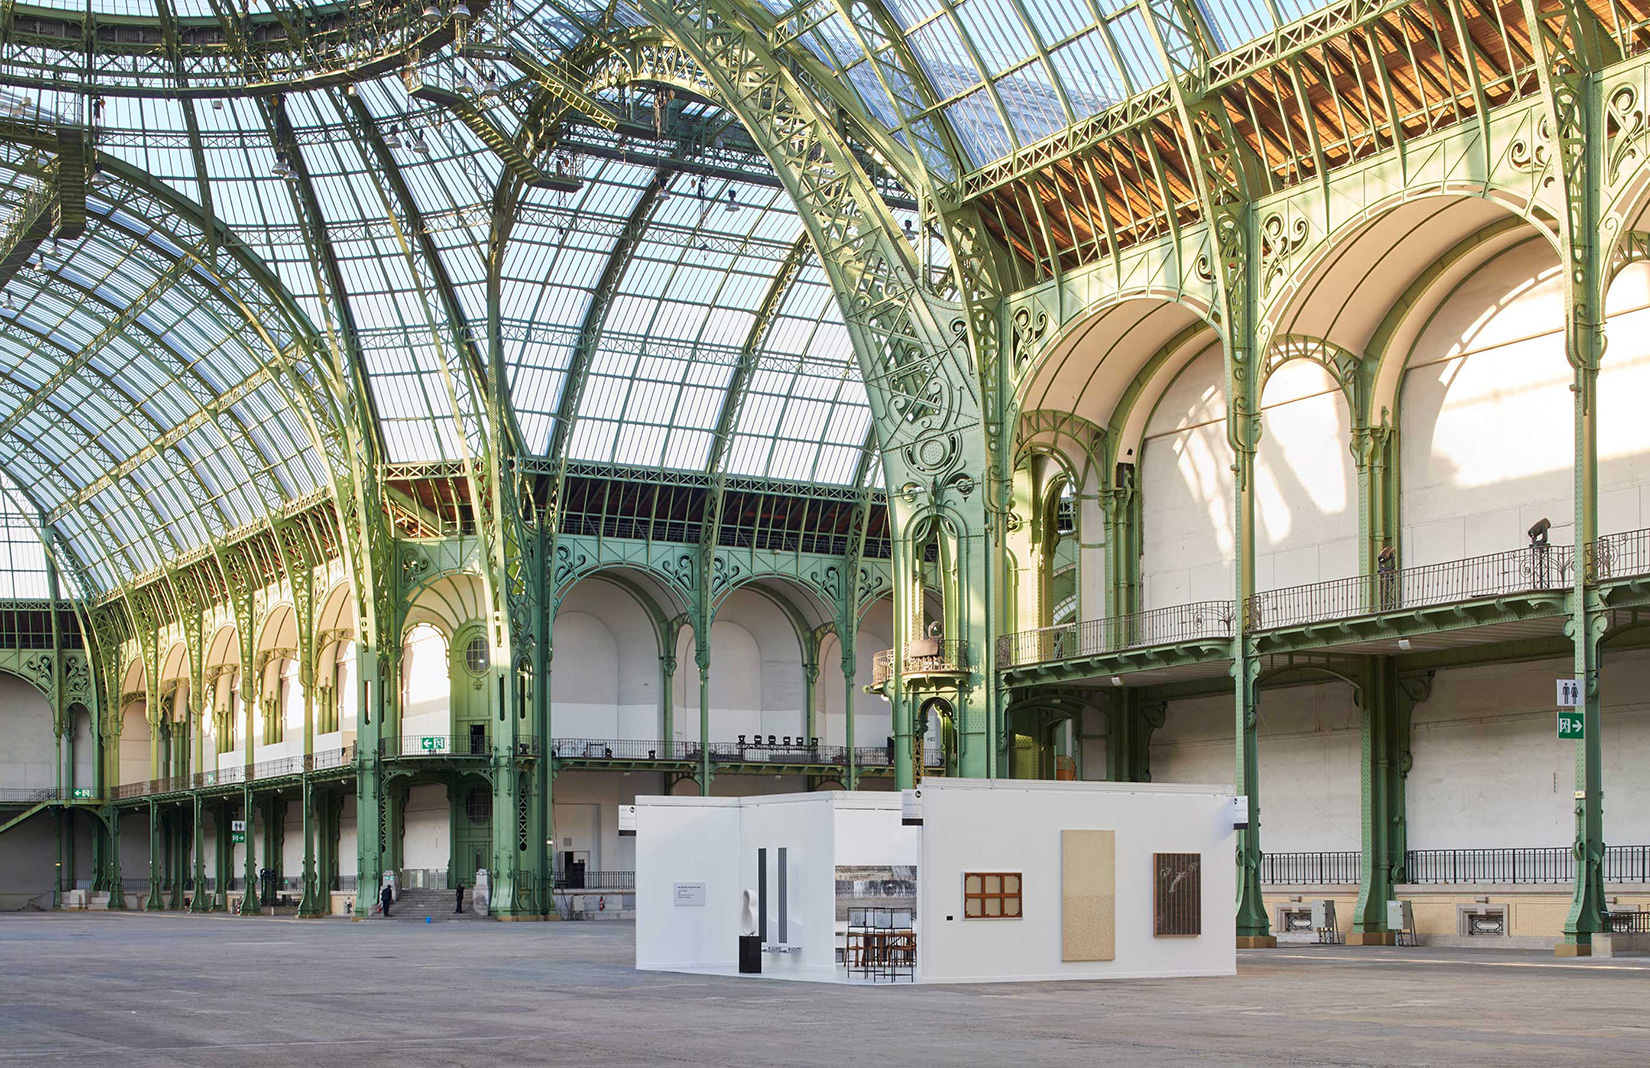 View of the one-day installation "Elmgreen & Dragset present Galerie Perrotin at the Grand Palais"